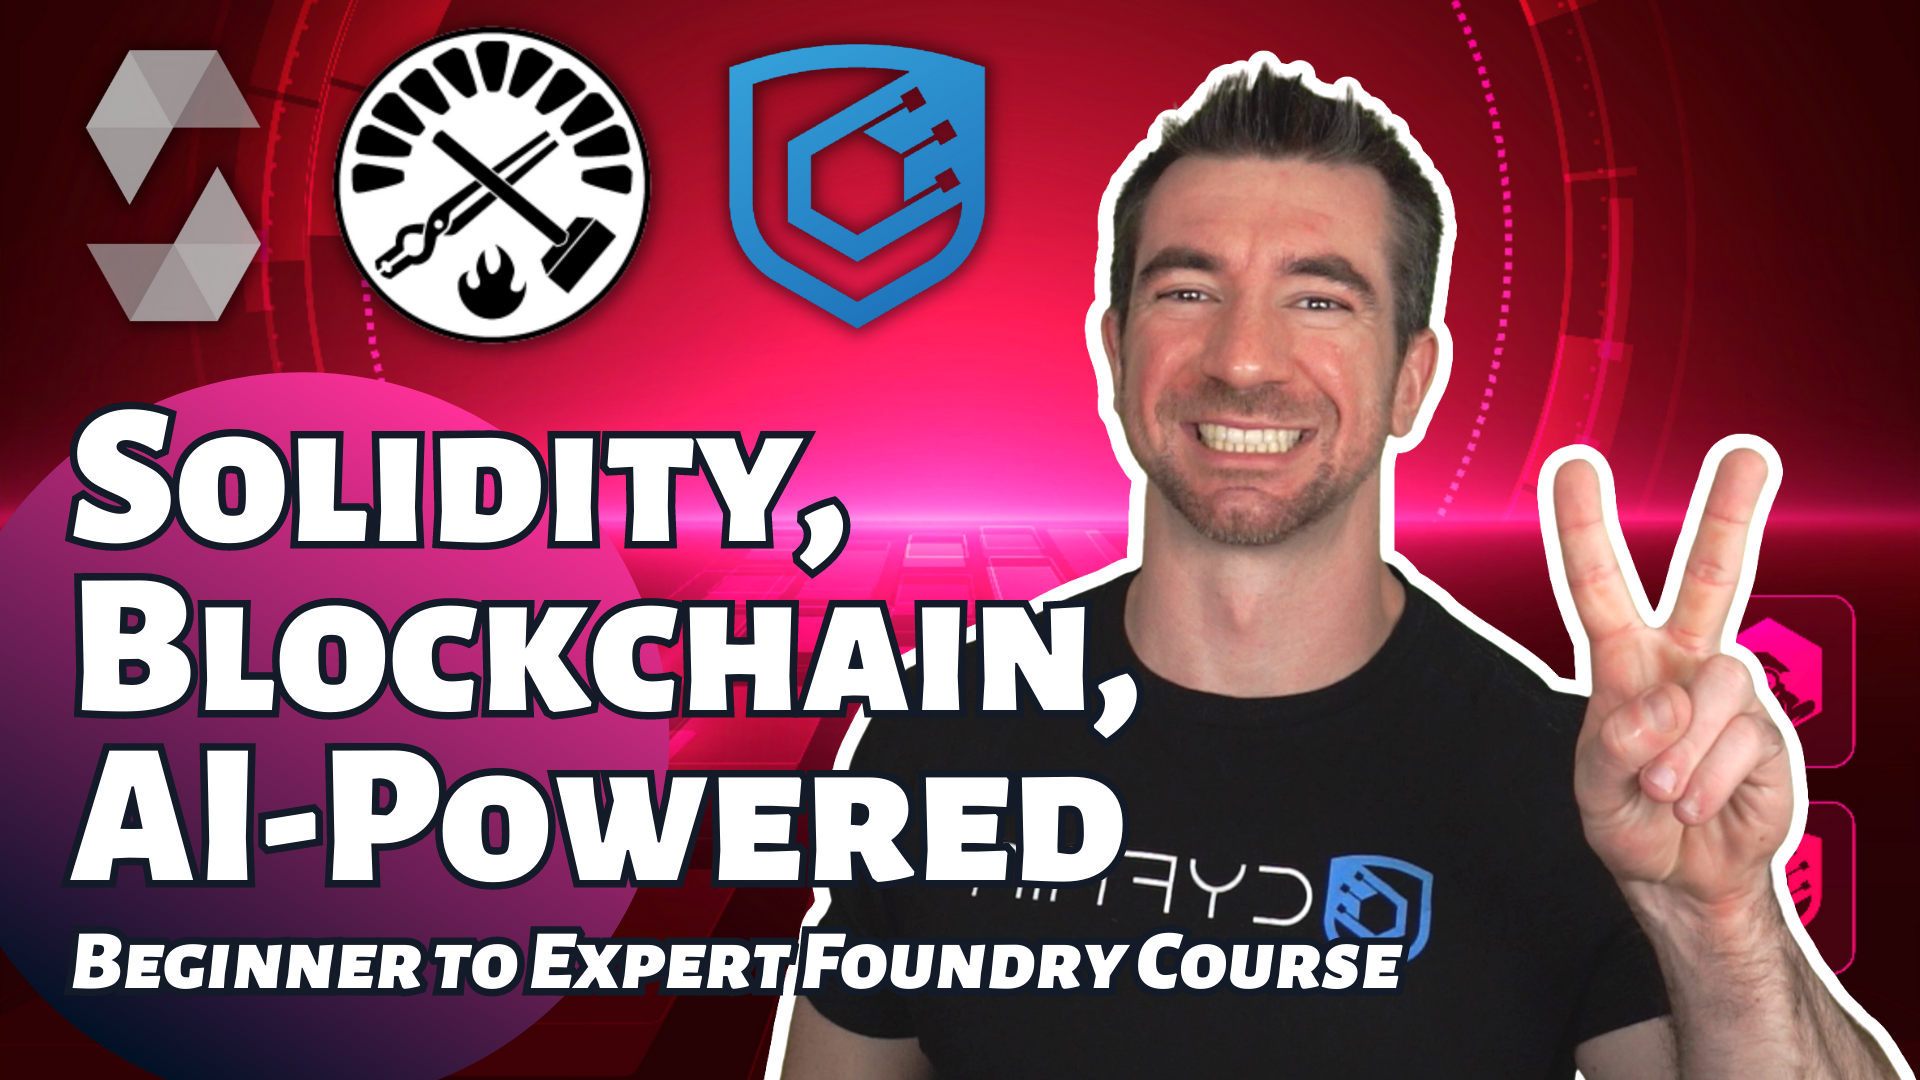 Blockchain Developer, Smart Contract, & Solidity Course - Powered By AI 2